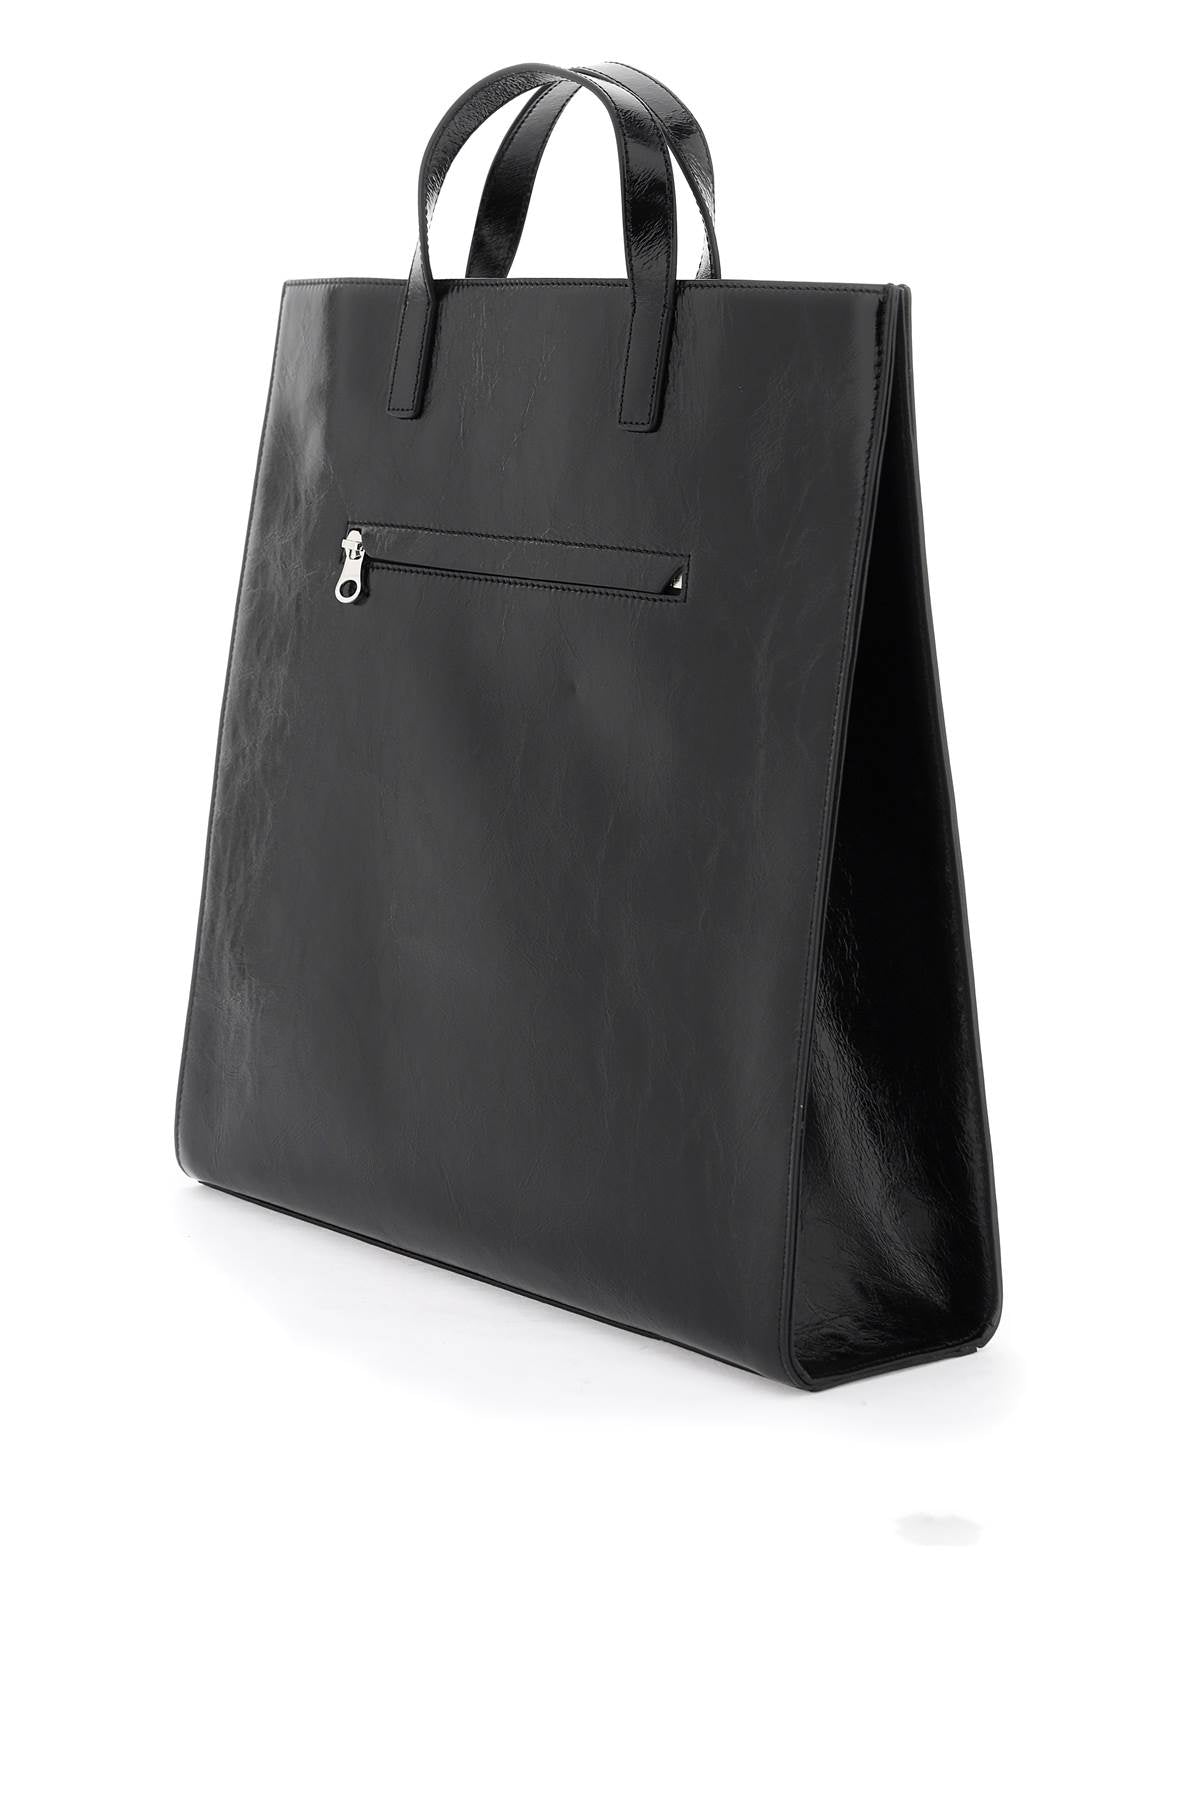 Stylish Heritage Tote Bag for Women in Black